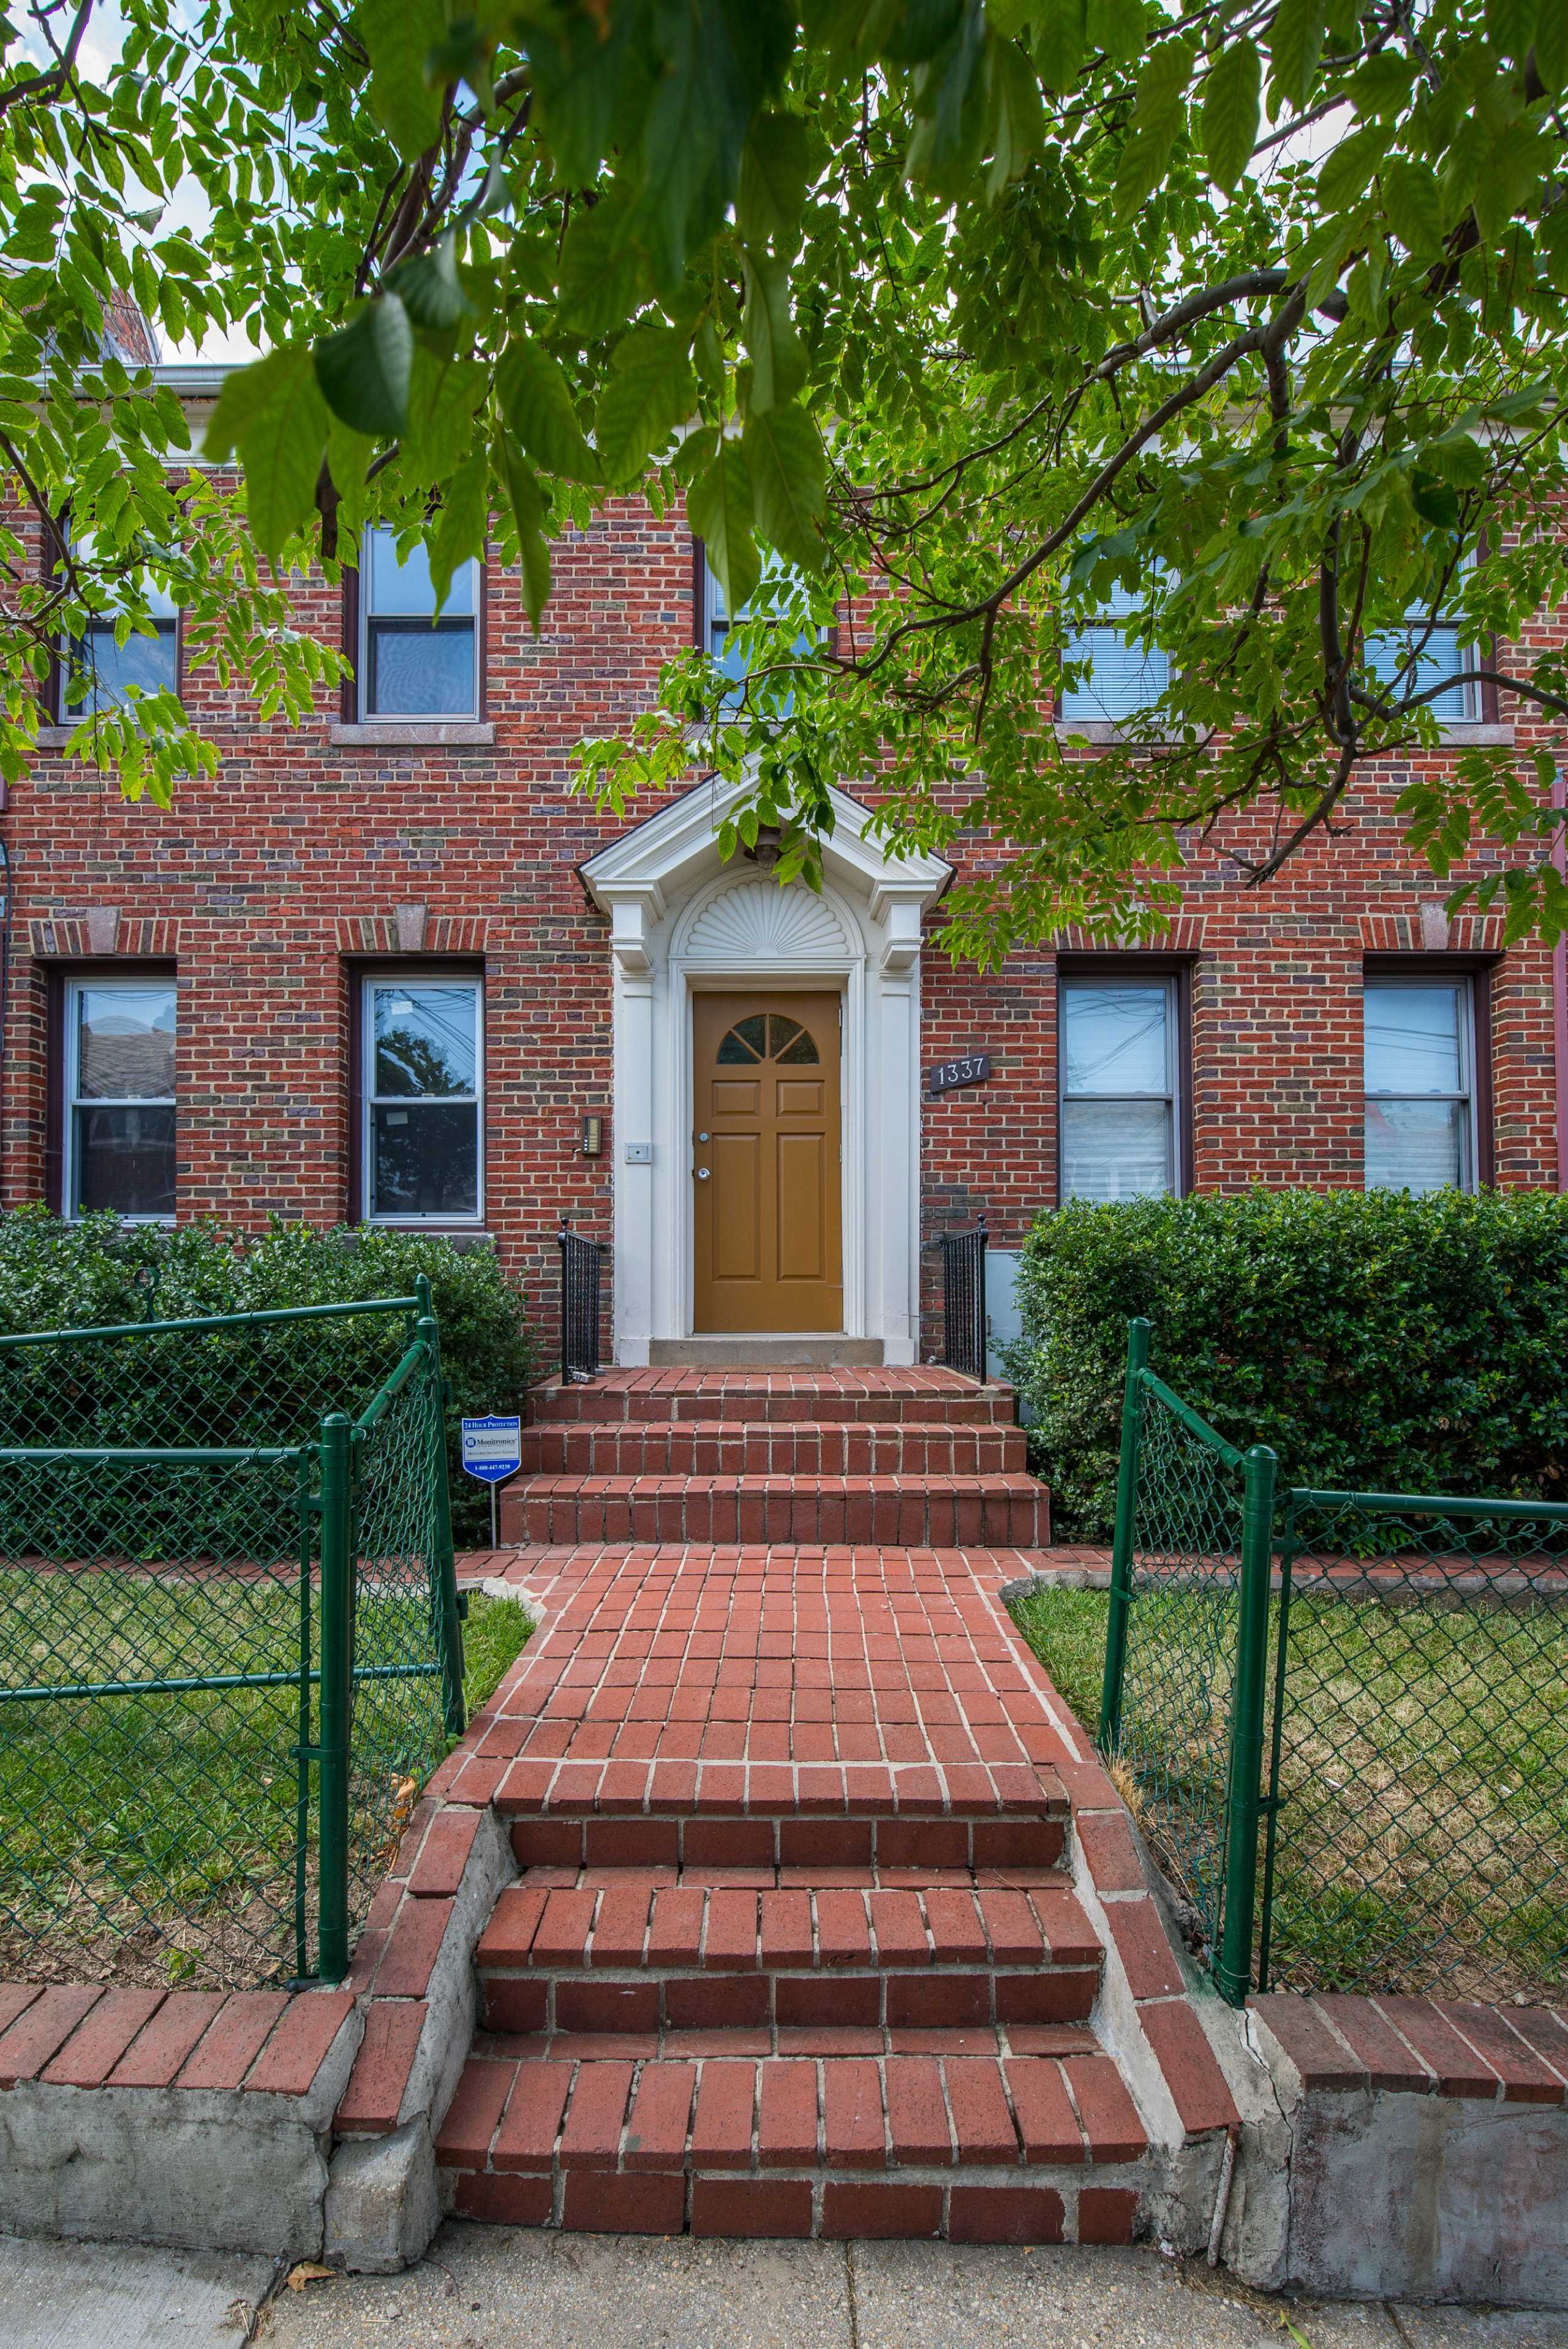 My client's home in Washington, D.C. Sold on August 8th by The Santiago Real Estate Team